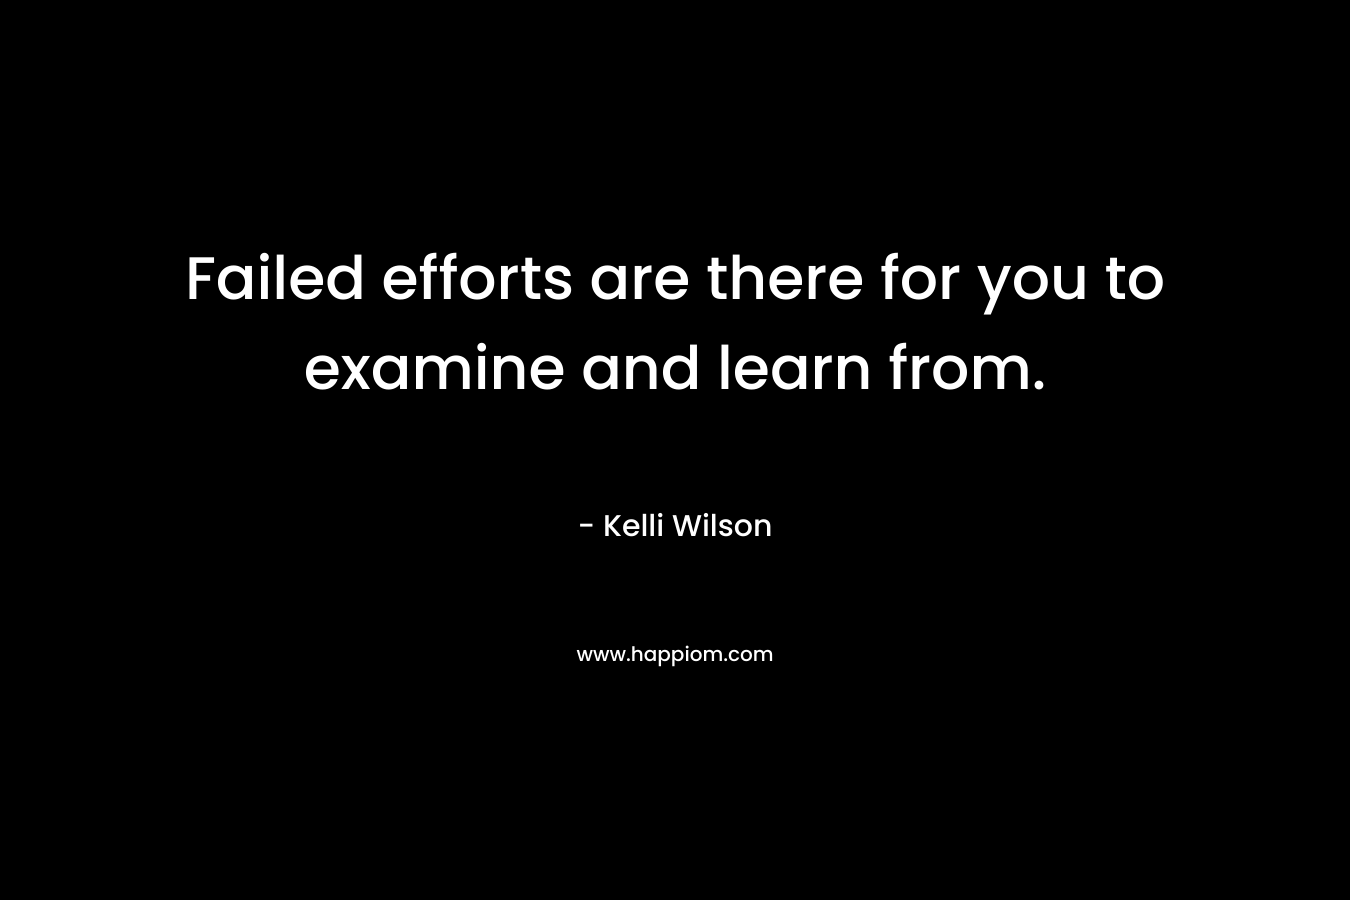 Failed efforts are there for you to examine and learn from.